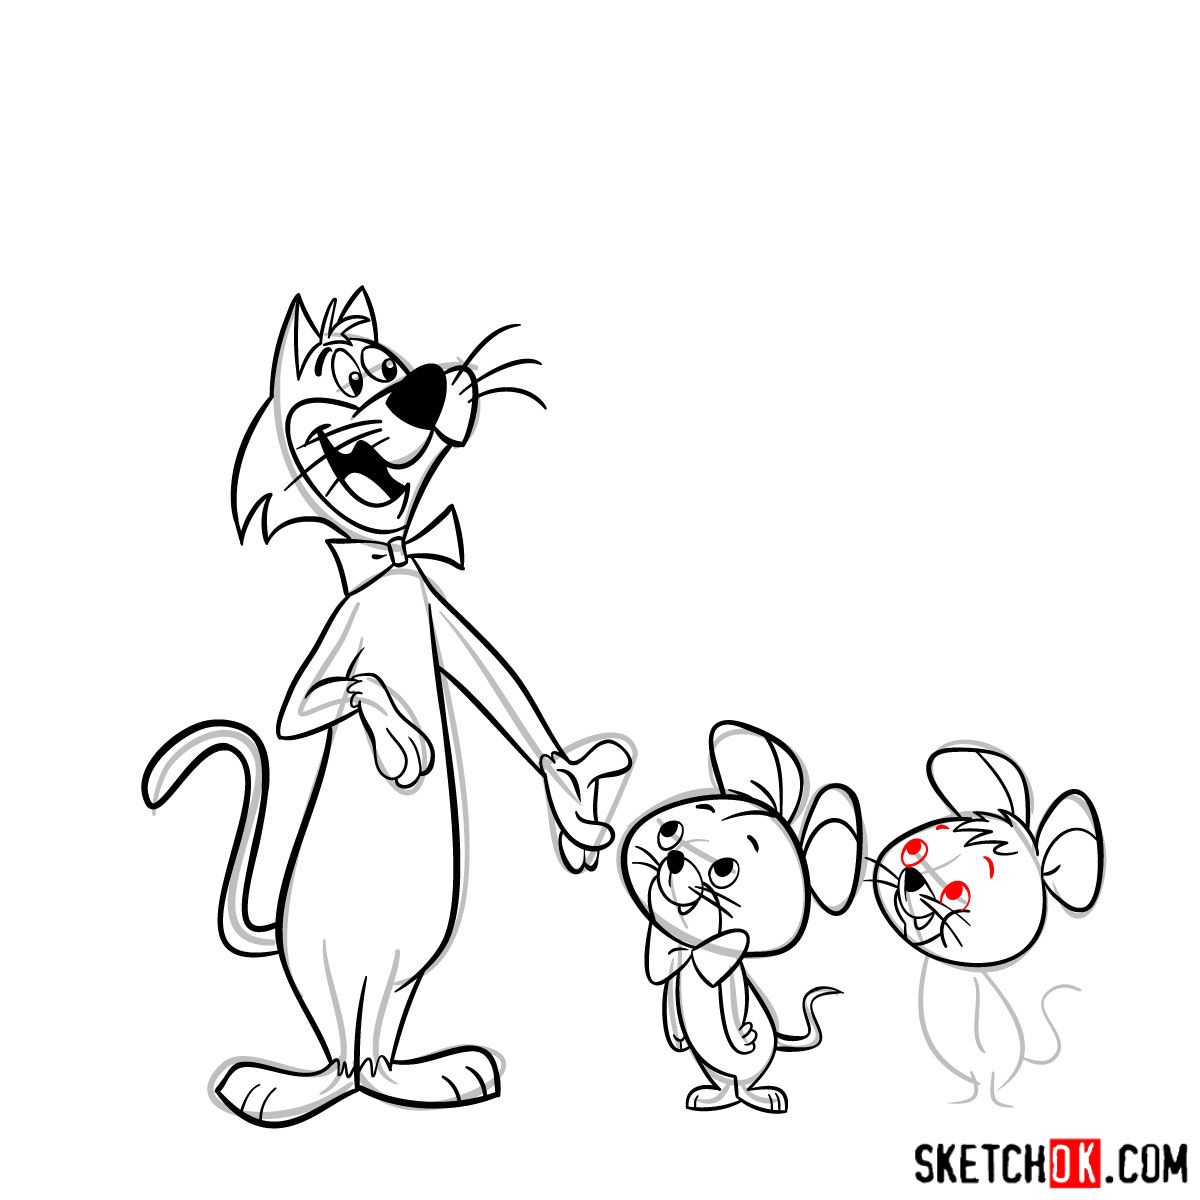 How to draw Pixie and Dixie and Mr. Jinks together - step 19